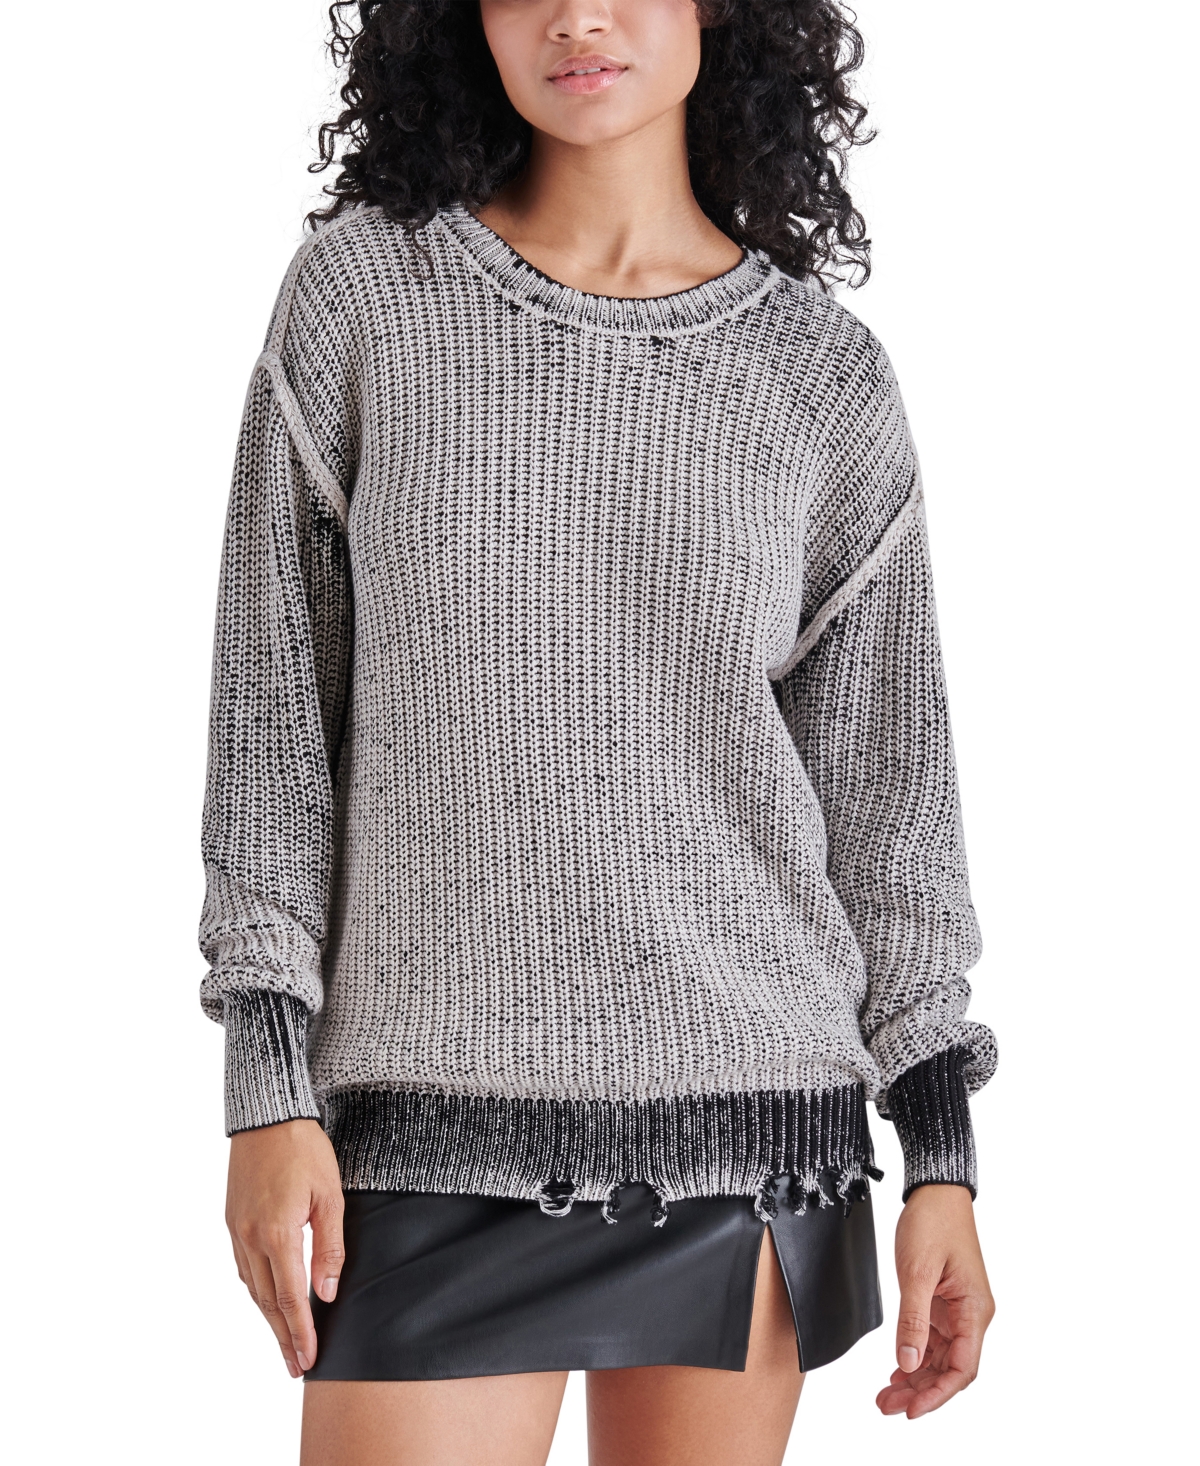 STEVE MADDEN WOMEN'S NELSON DISTRESSED COTTON TWO-TONE SWEATER